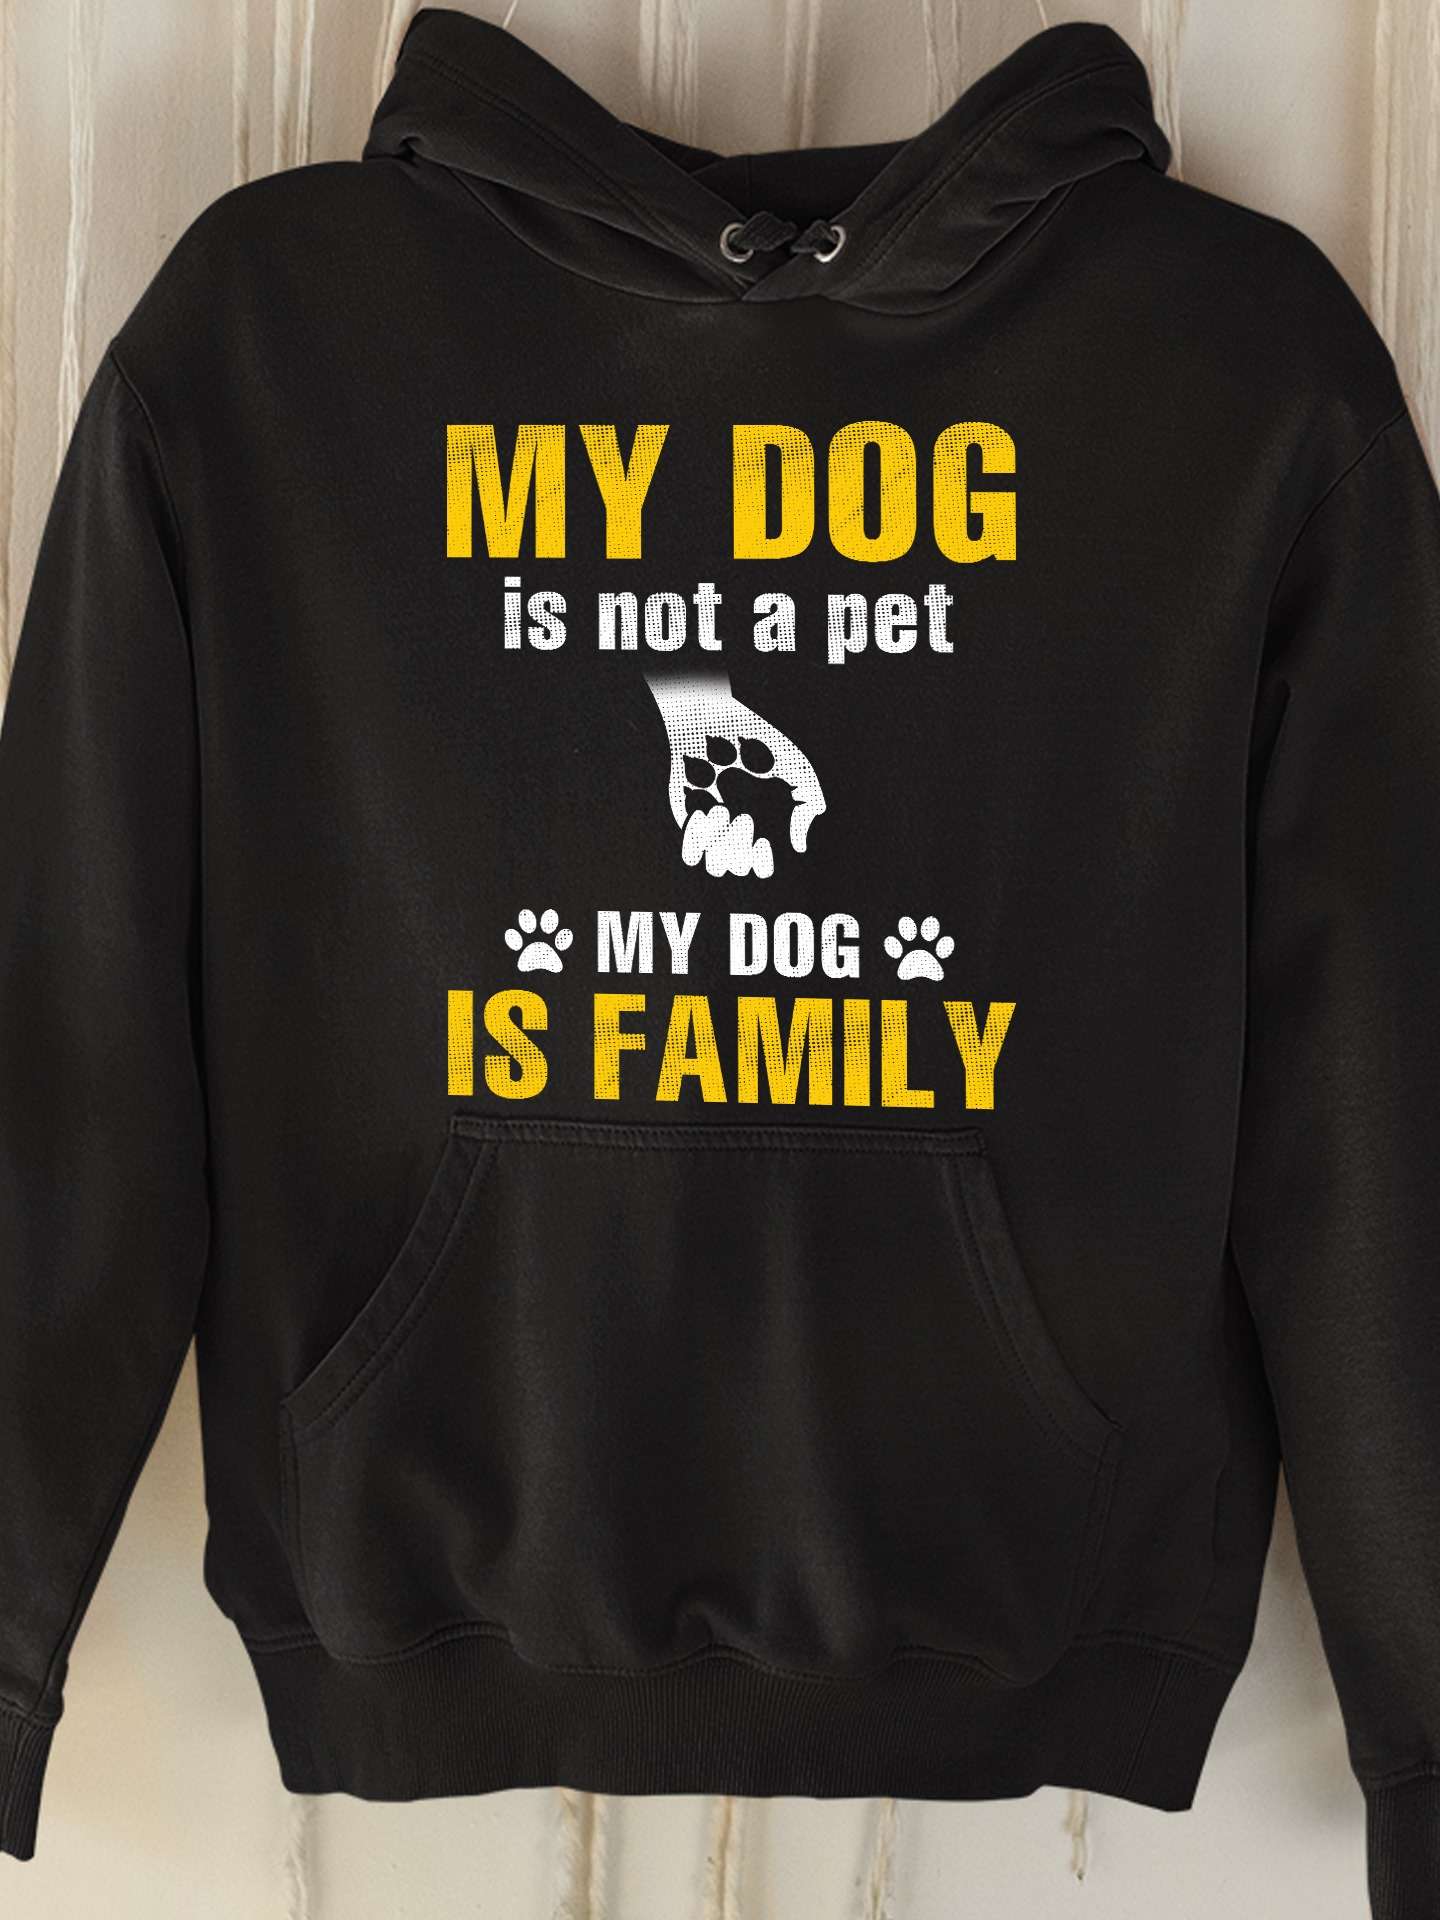 My dog is not a pet my dog is family - Dog lover, dog family